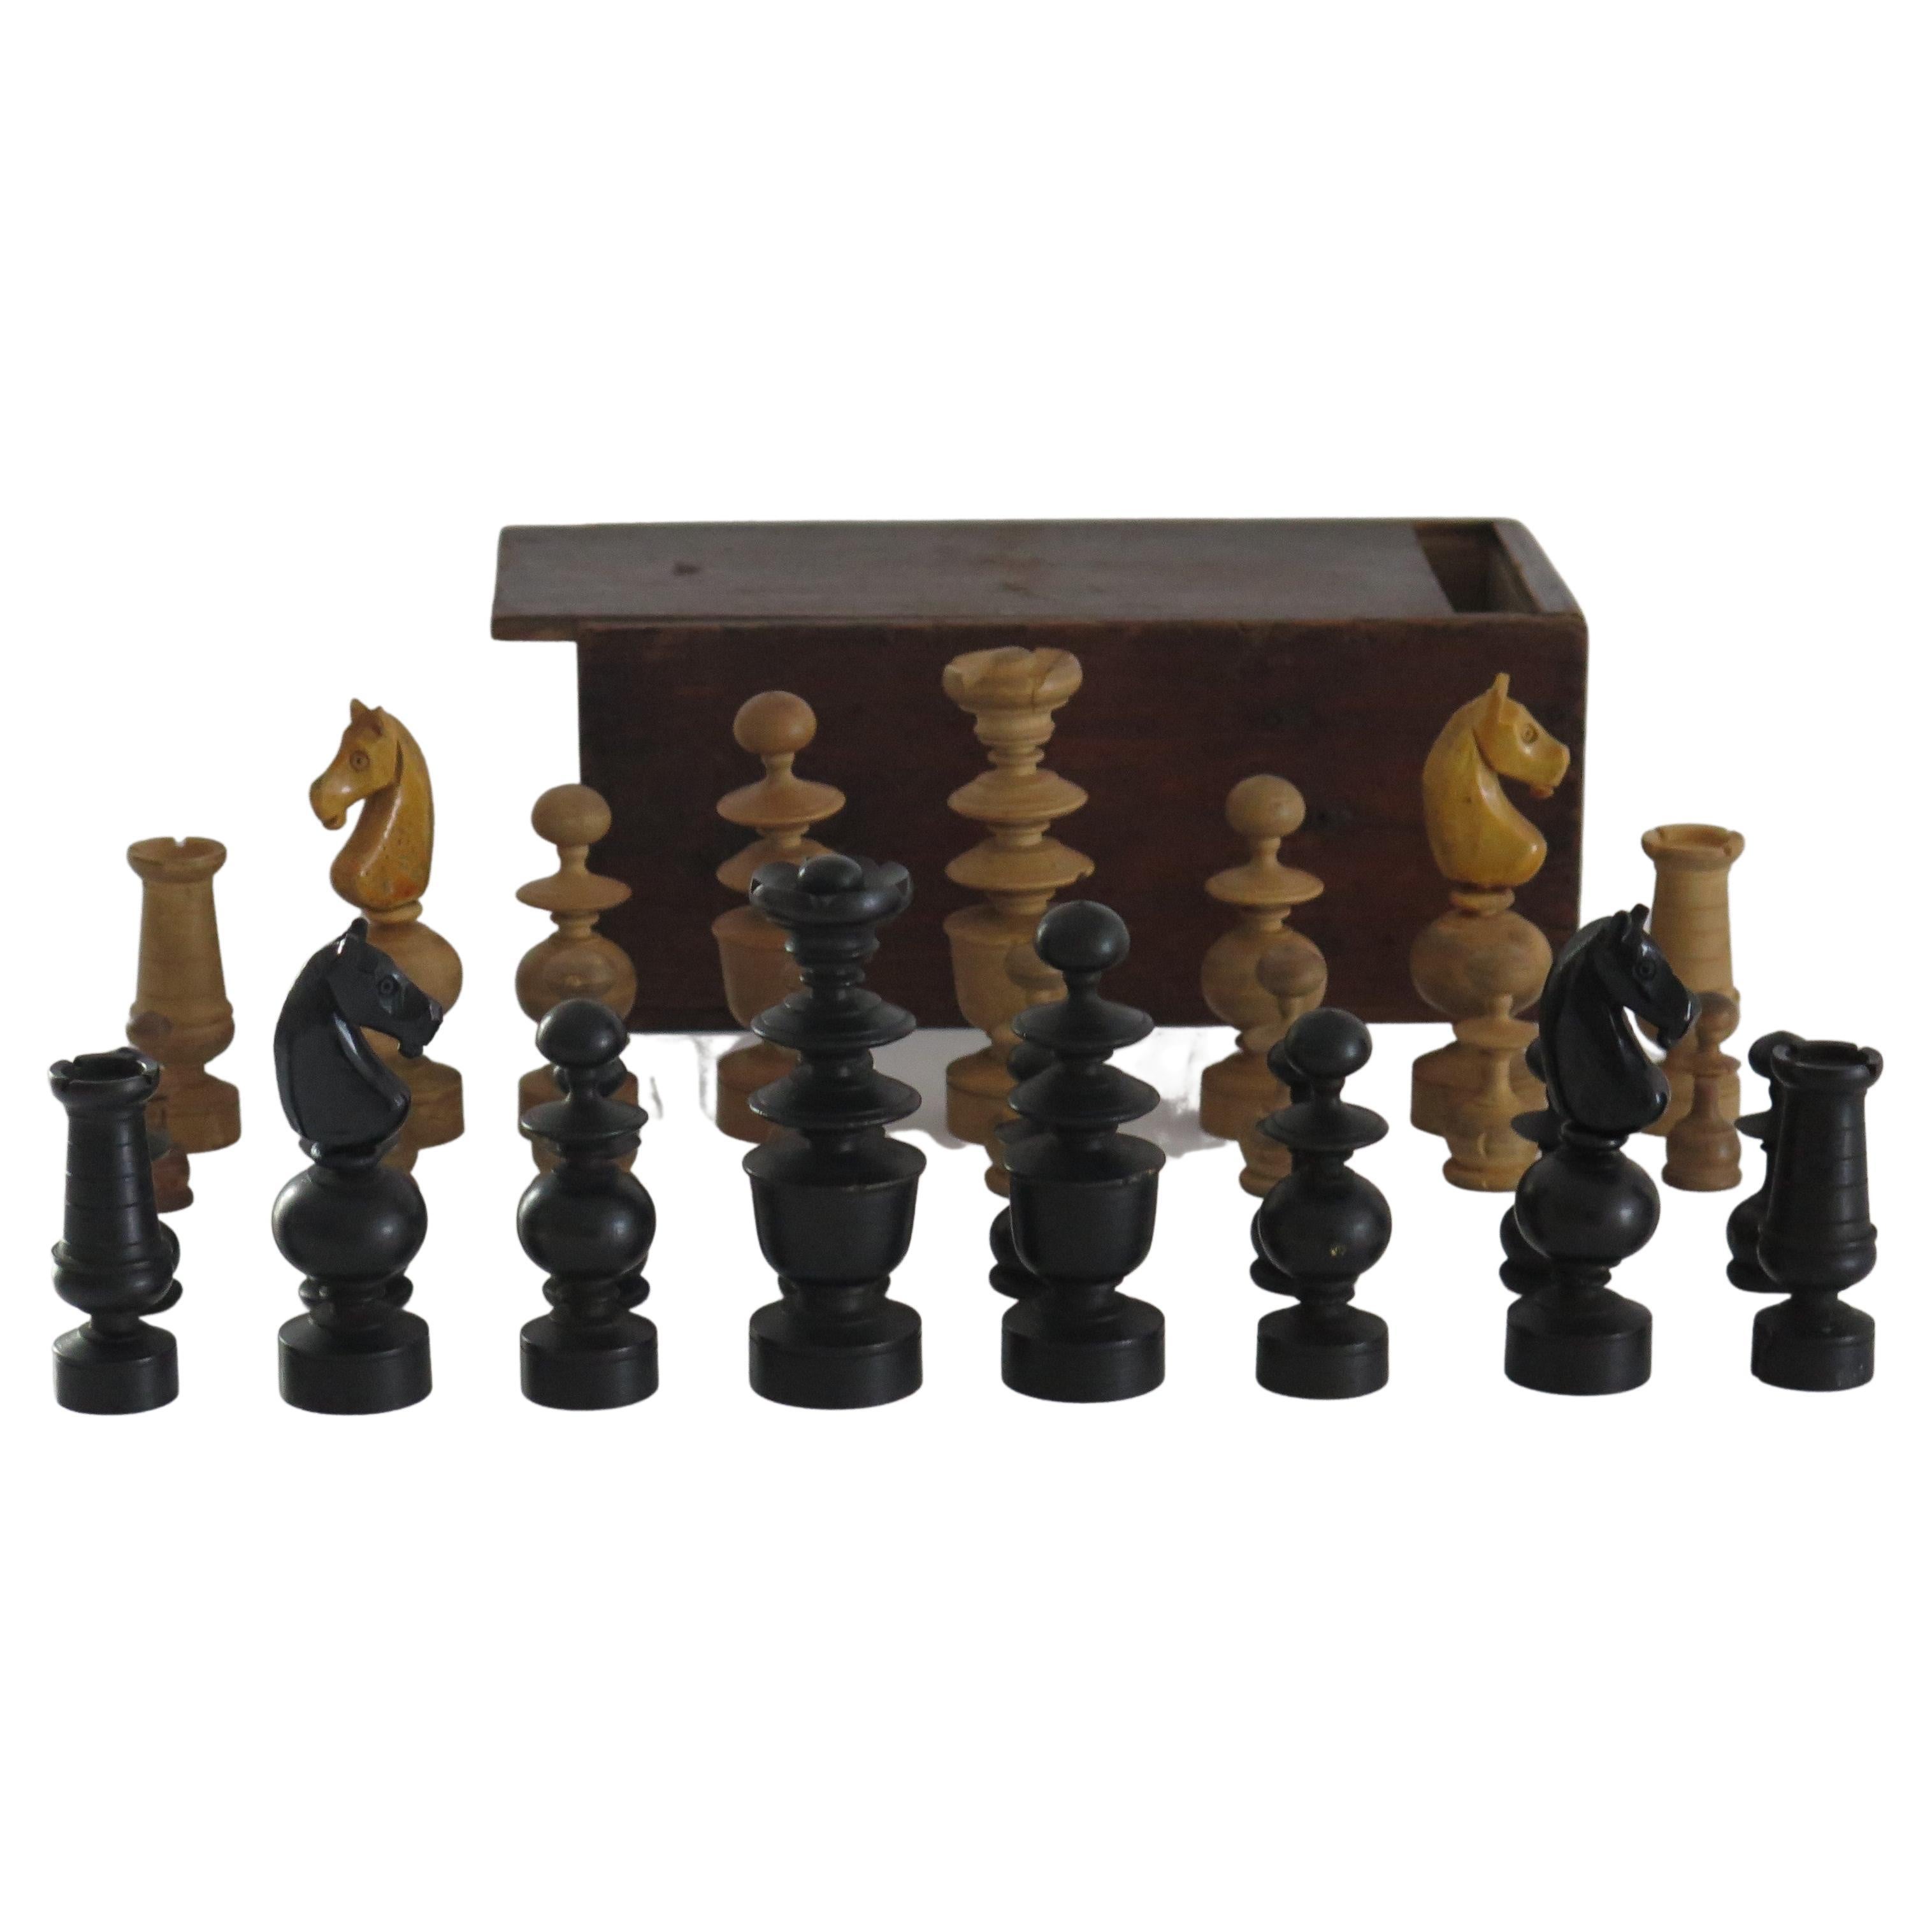 This is a very good and complete handmade, hardwood chess set game of 32 pieces in a handmade pine box with a sliding lid, which we date to the turn of the 19th Century, Circa 1900.

The chess set is complete with 32 handmade and turned hardwood